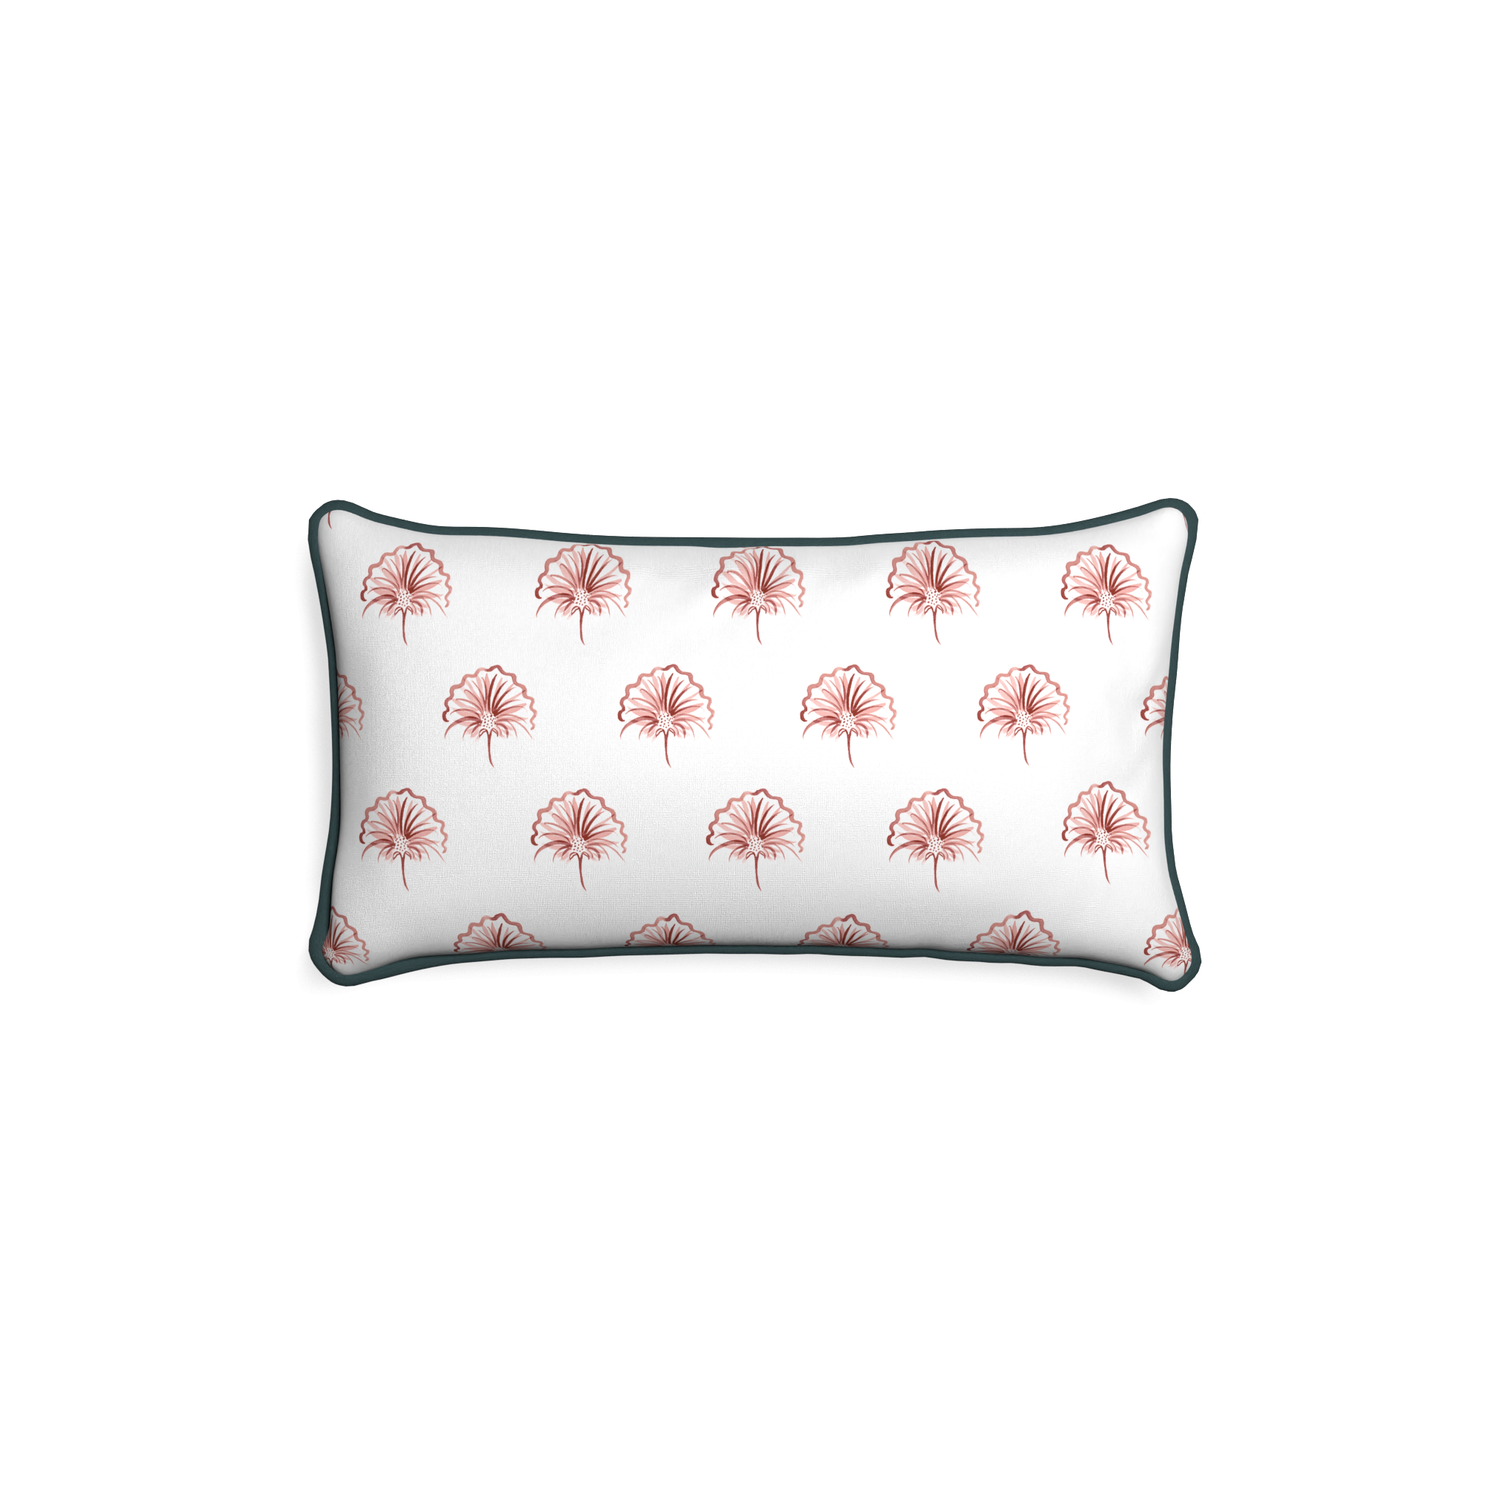 Petite-lumbar penelope rose custom floral pinkpillow with p piping on white background